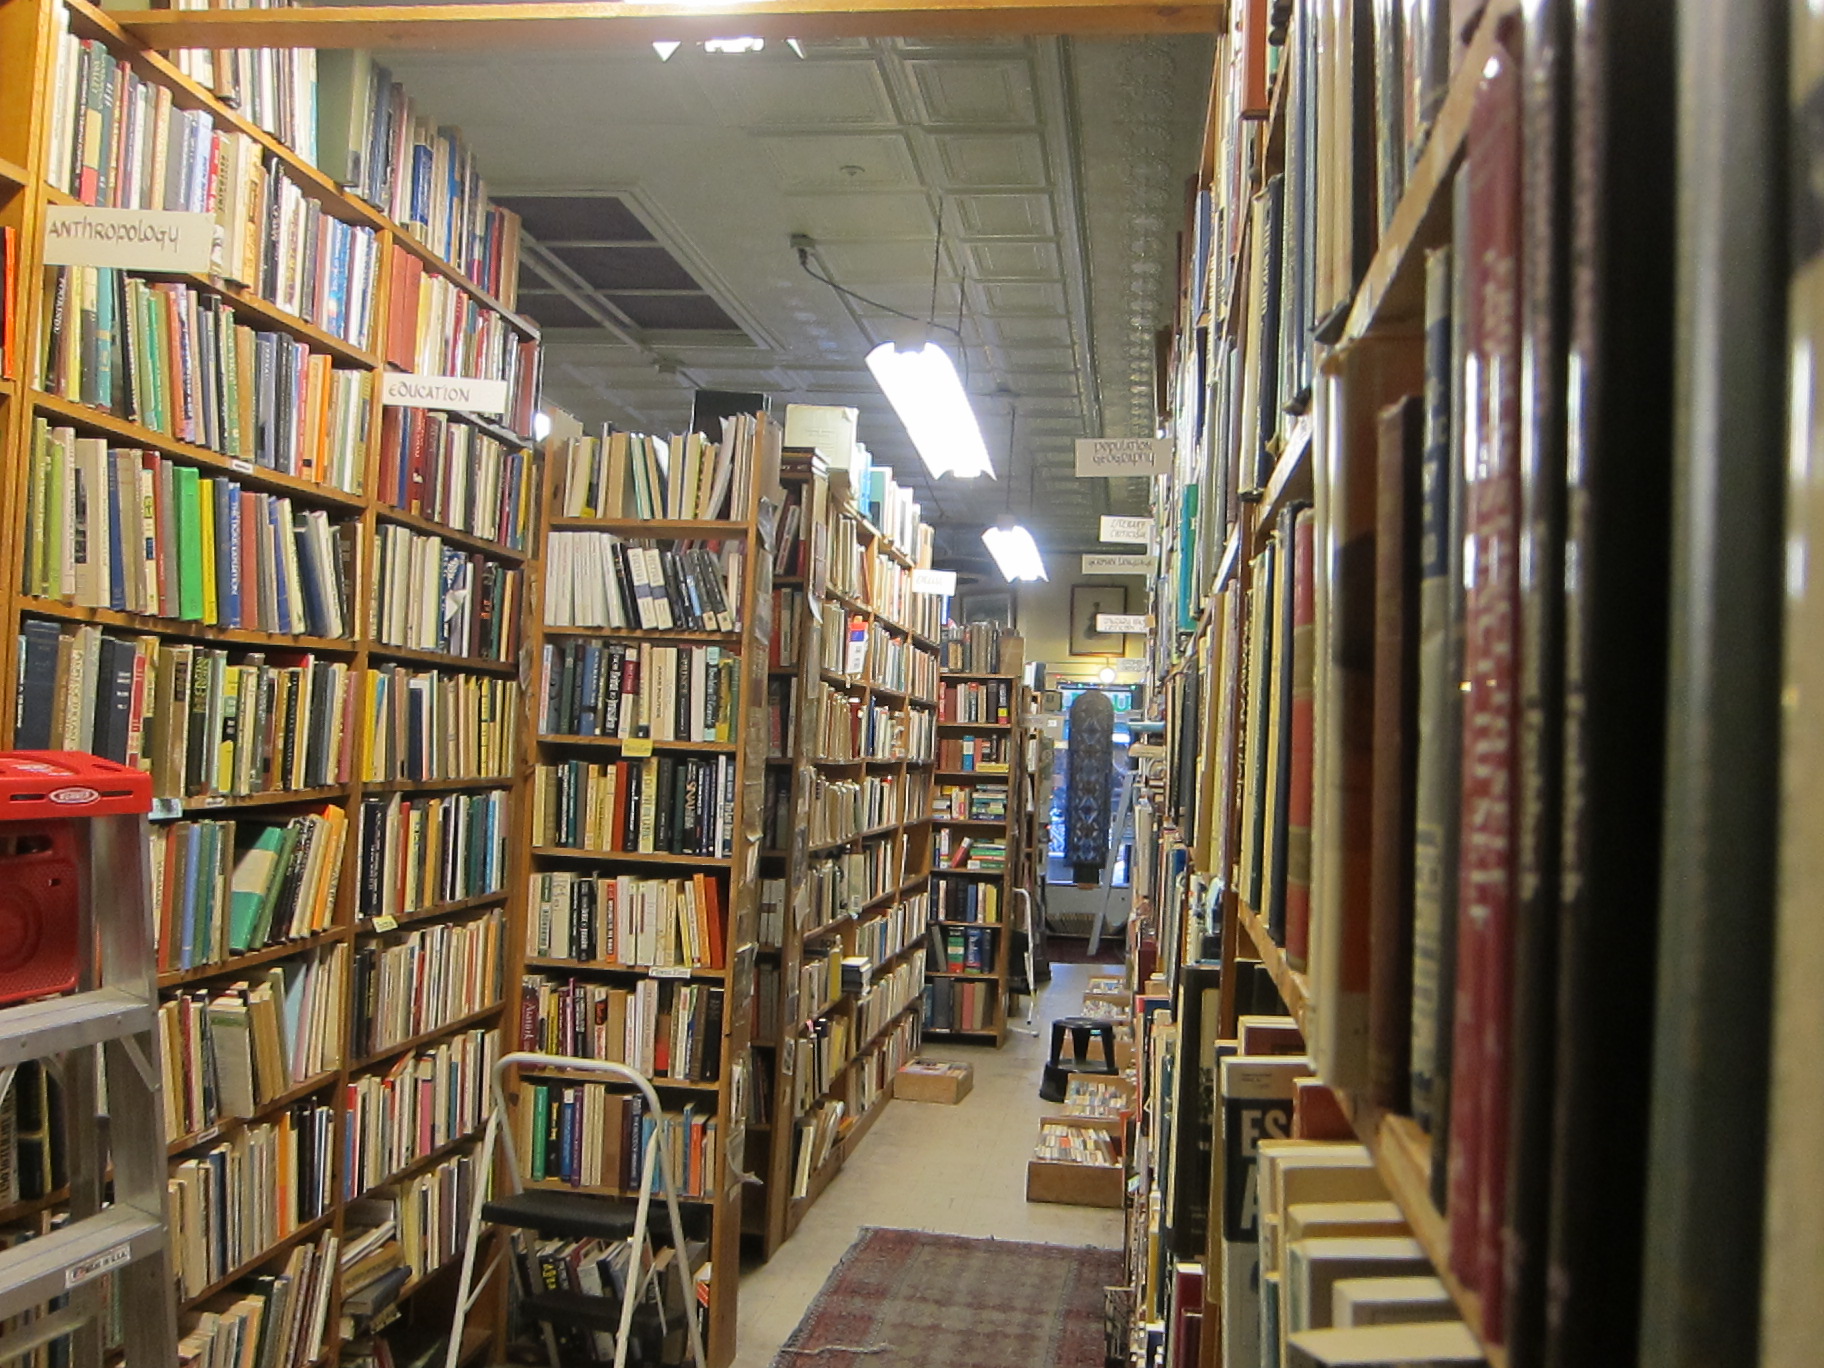 a long liry with a number of books on shelves